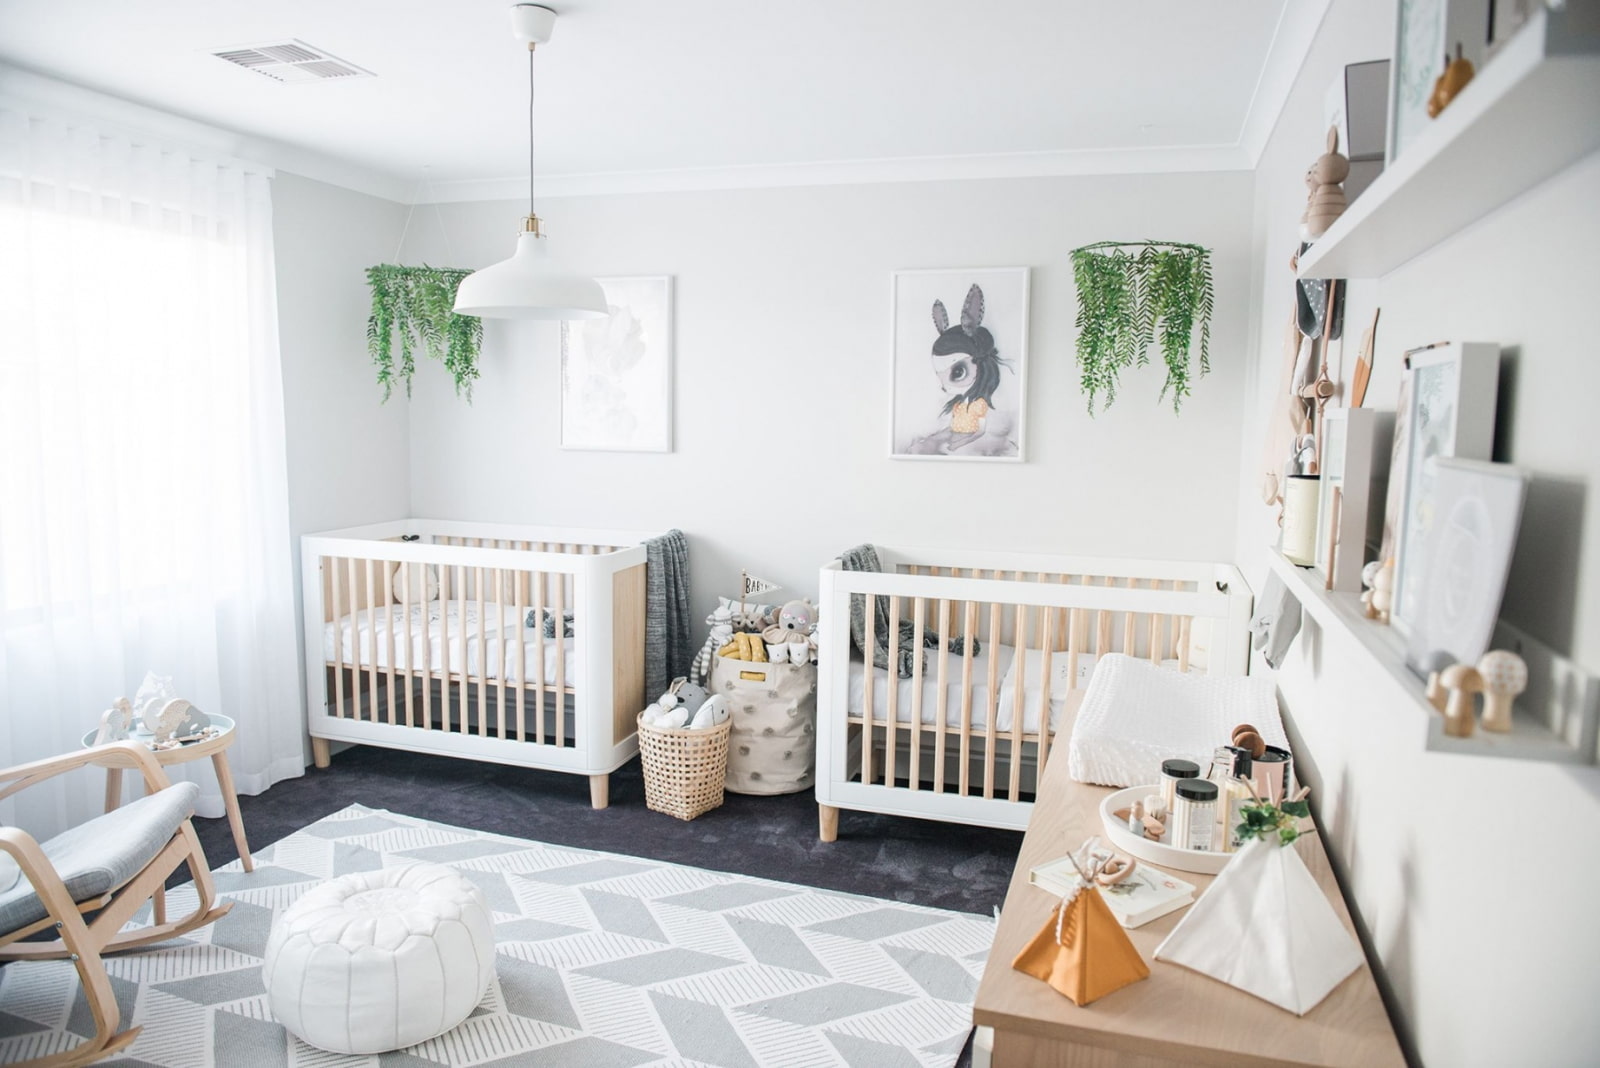 Room for a newborn: the choice of a crib, options for arrangement, photo